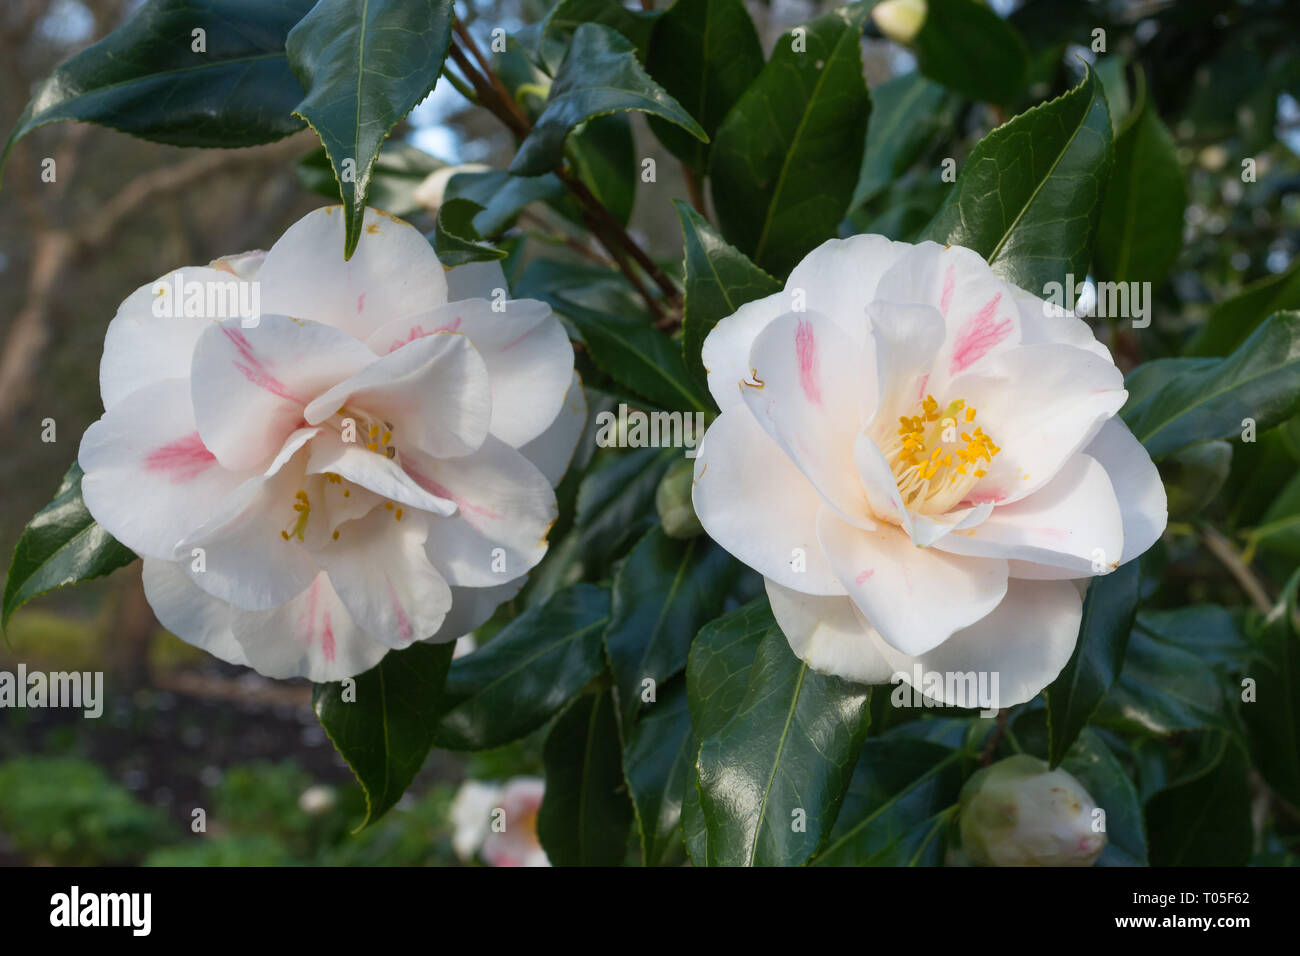 Flowers of camellia japonica 'lady vansittart pink' in early spring in an English garden Stock Photo